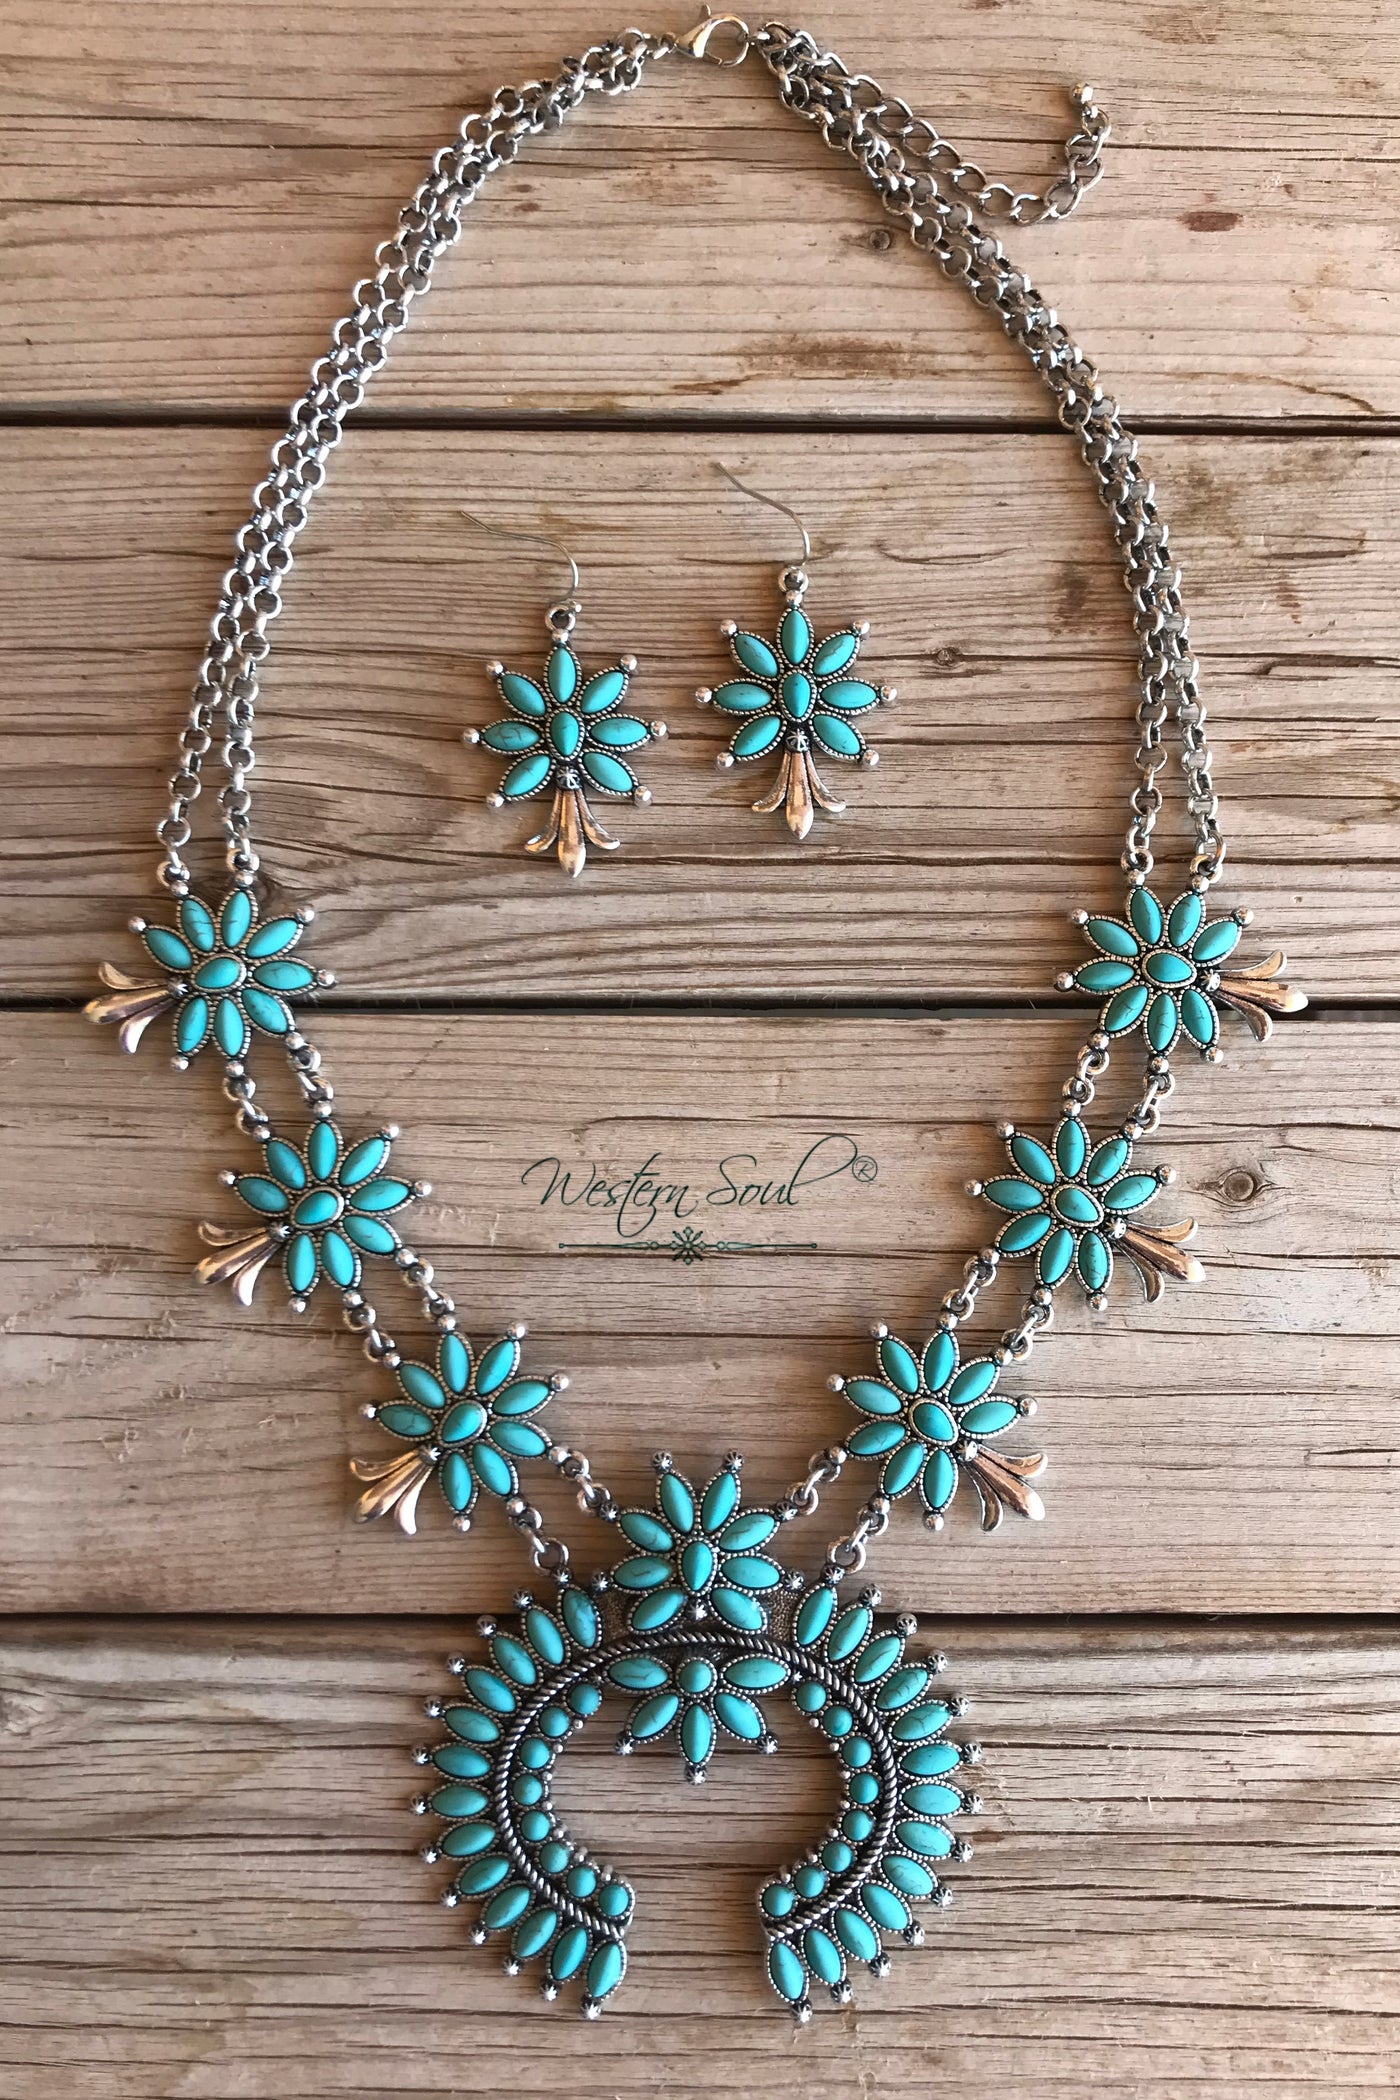 Western Necklace  Kaycee Squash Blossom Necklace Set from Blue Tortoise